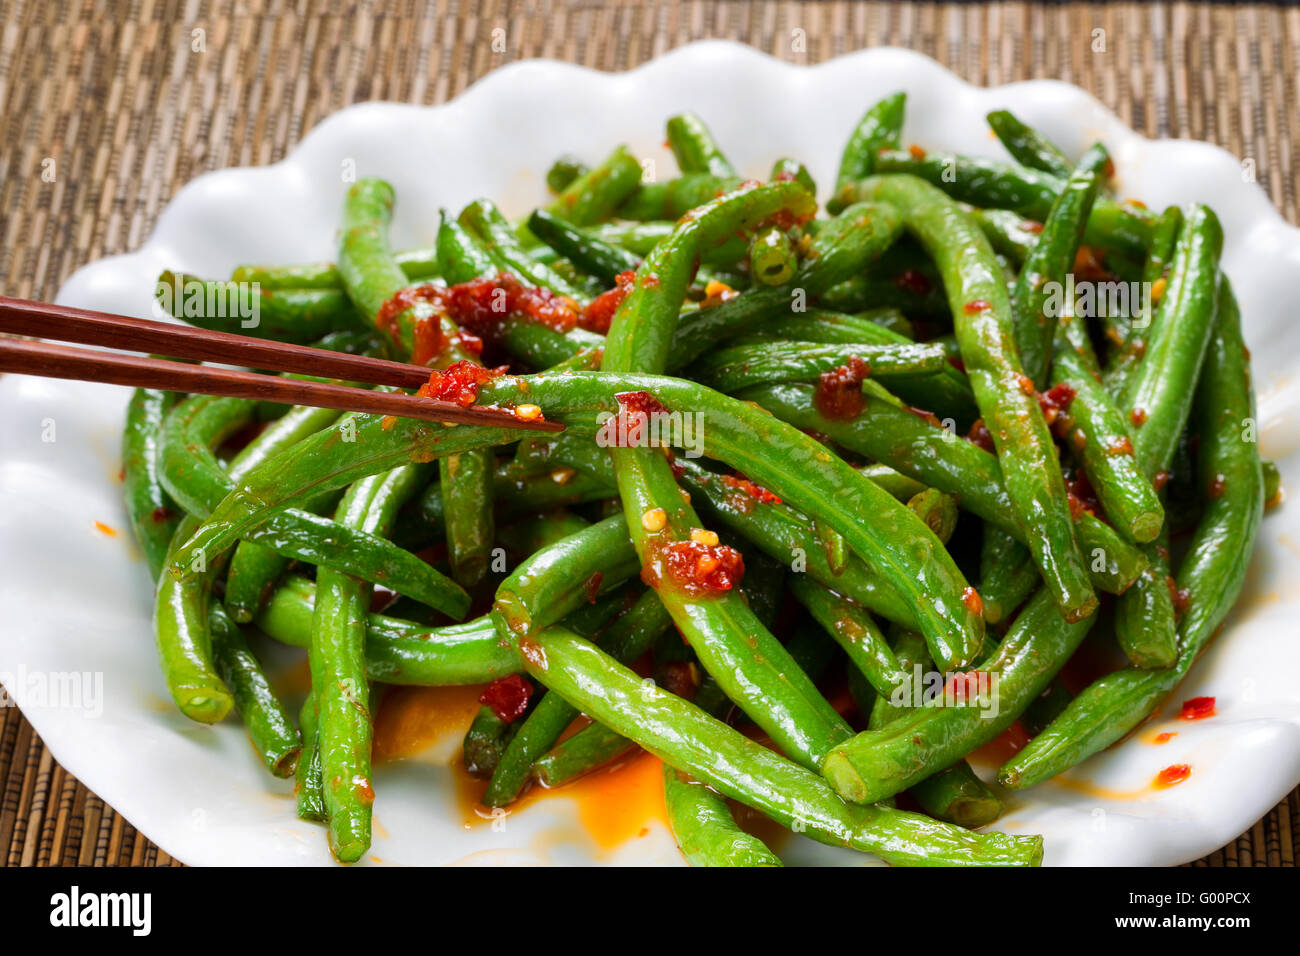 Cooked spicy greens in plate ready to eat Stock Photo